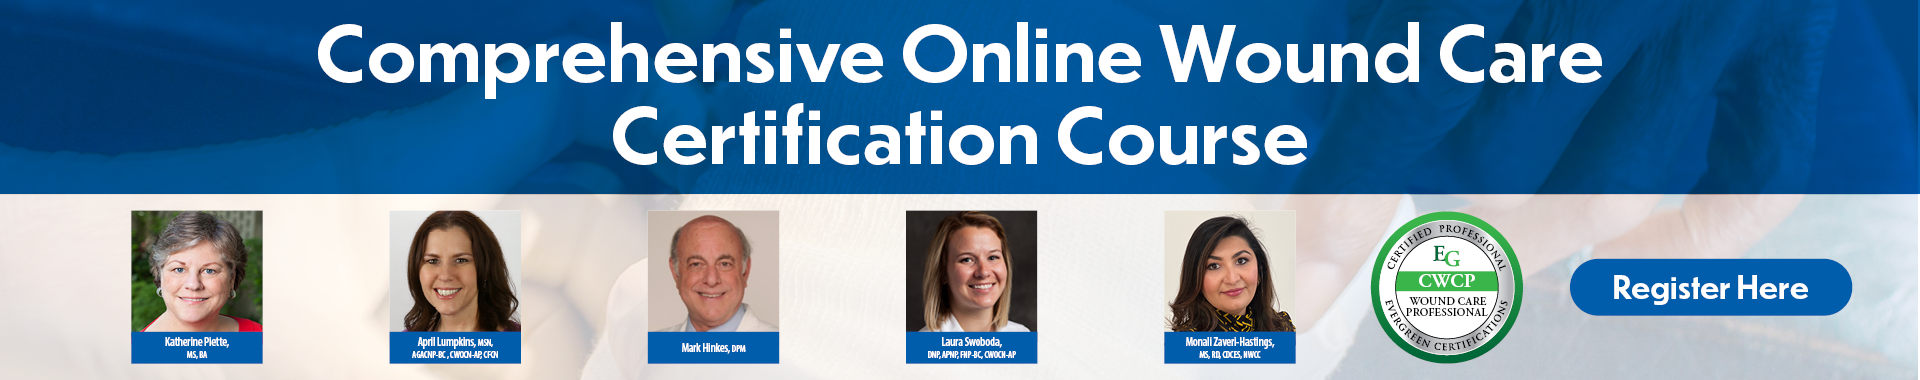 Comprehensive Online Wound Care Certification Course